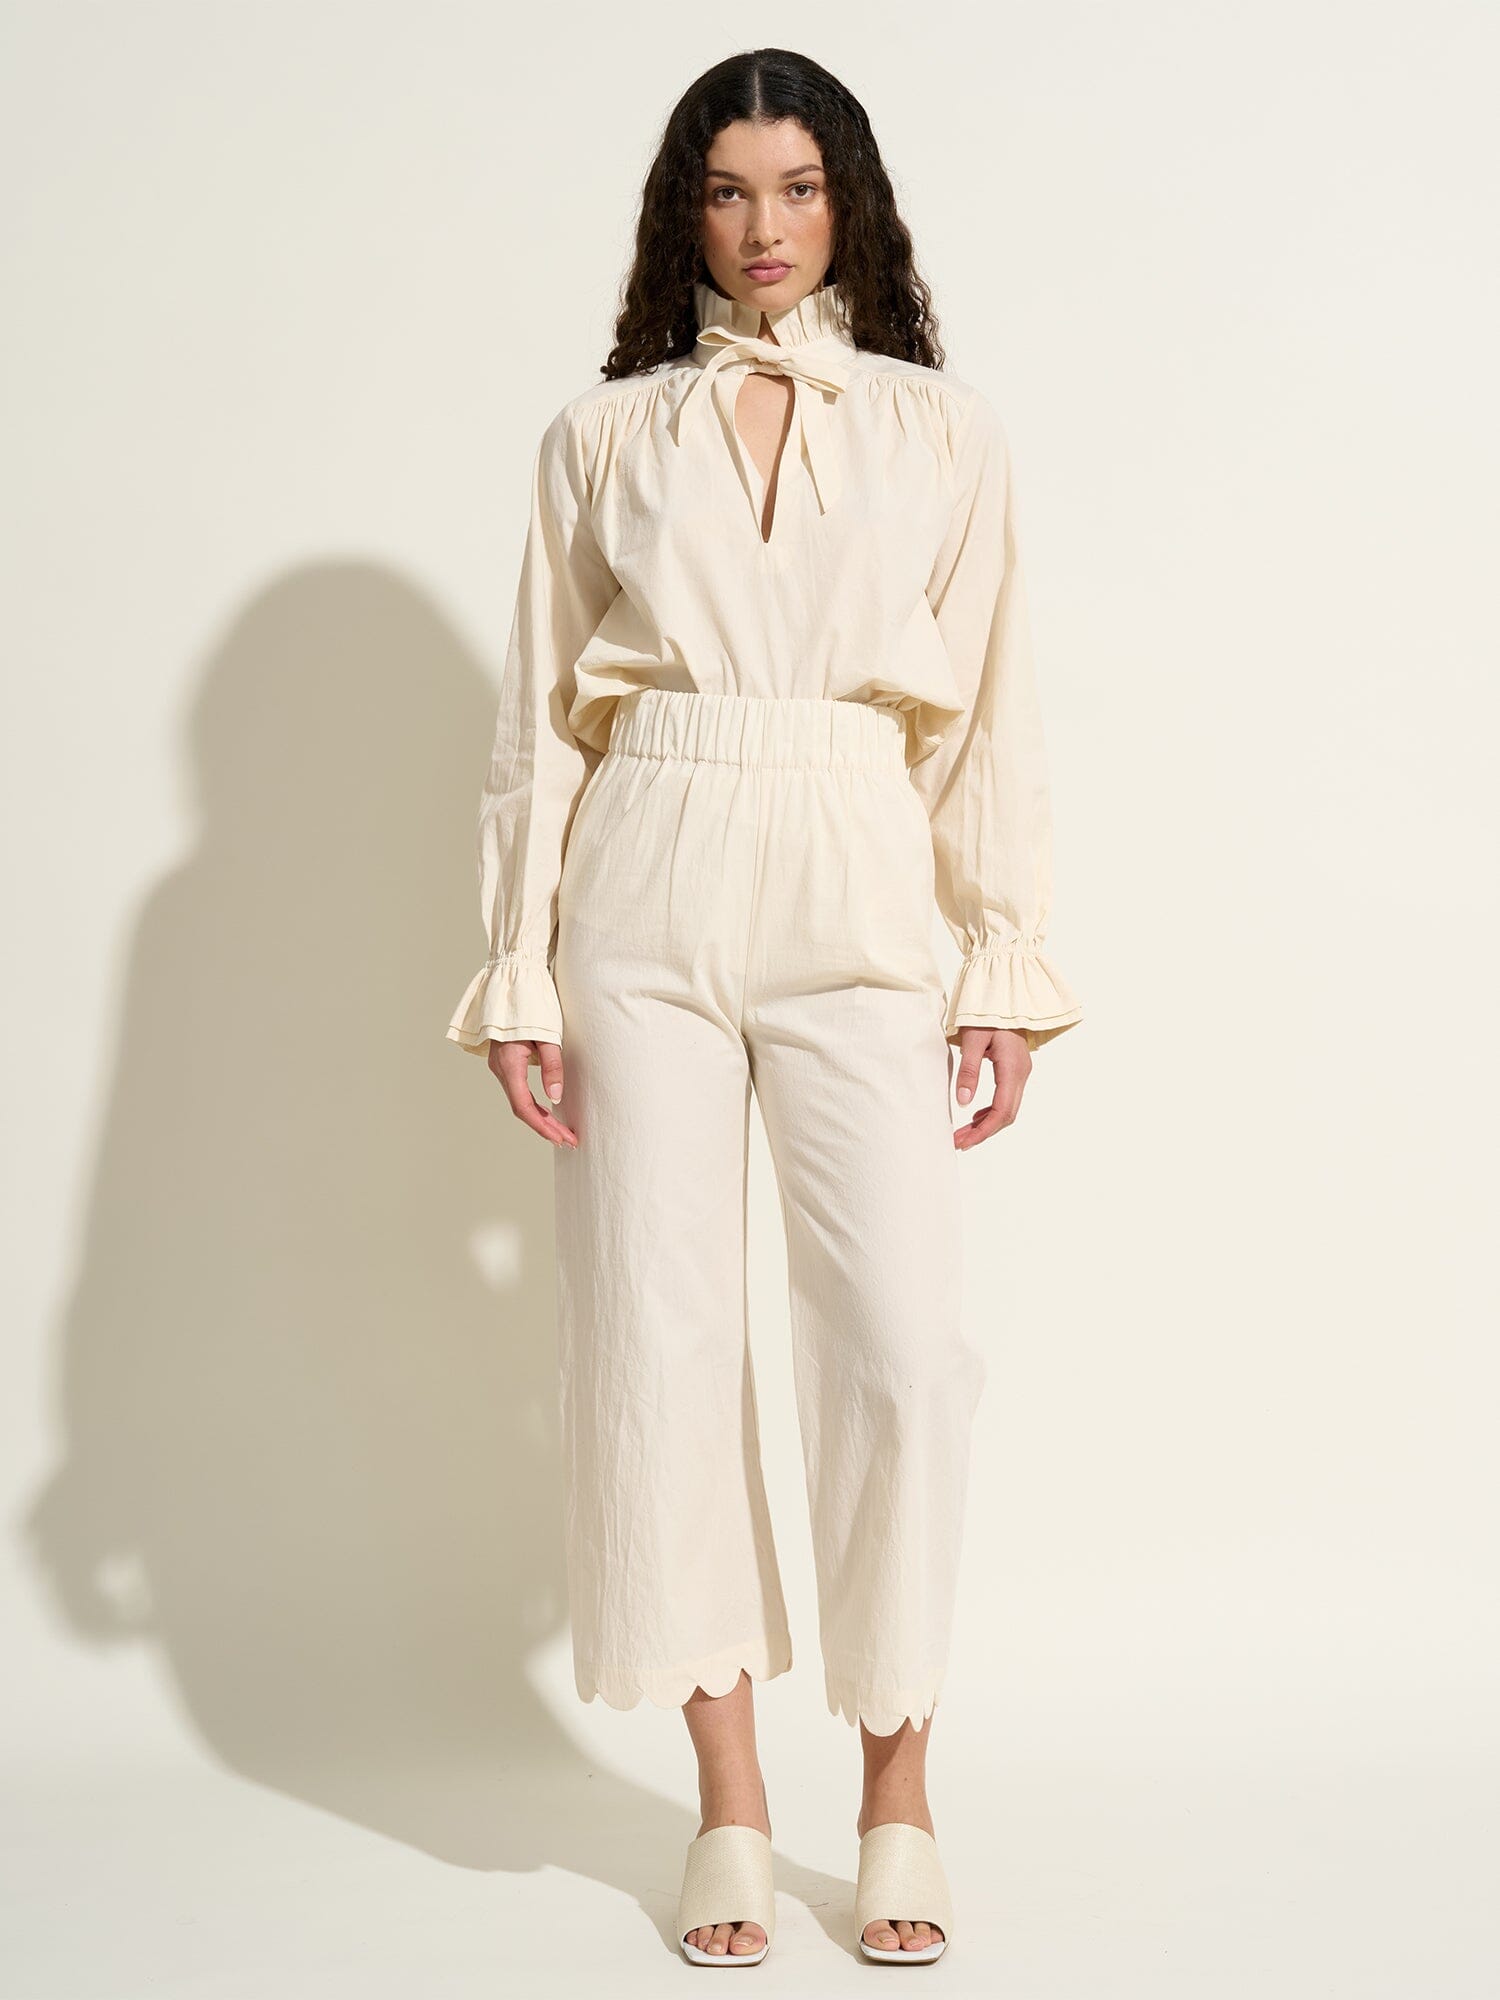 SIFNOS - Wide-leg high-waisted pants with elasticated bottom and petal finish in Cotton Crumpled Ecru Trousers Fête Impériale